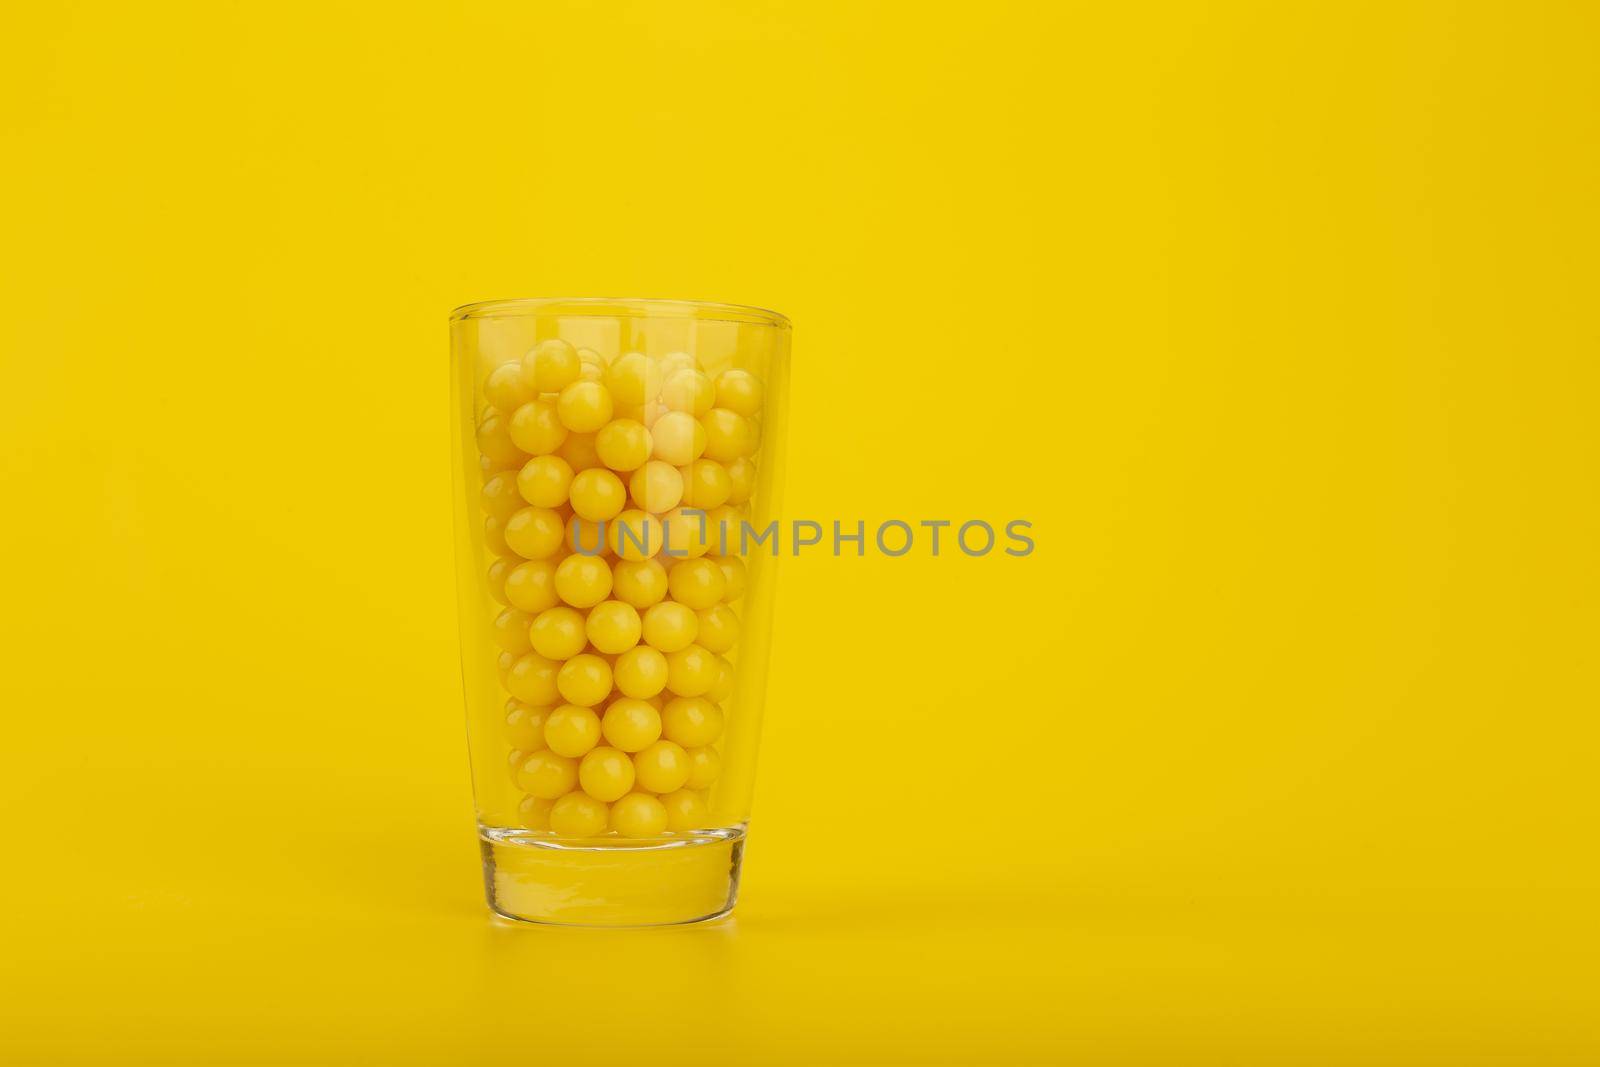 Transparent glass shot with yellow round vitamins on yellow background with space for text. The concept of vitamin C and vitamin D or healthy lifestyle